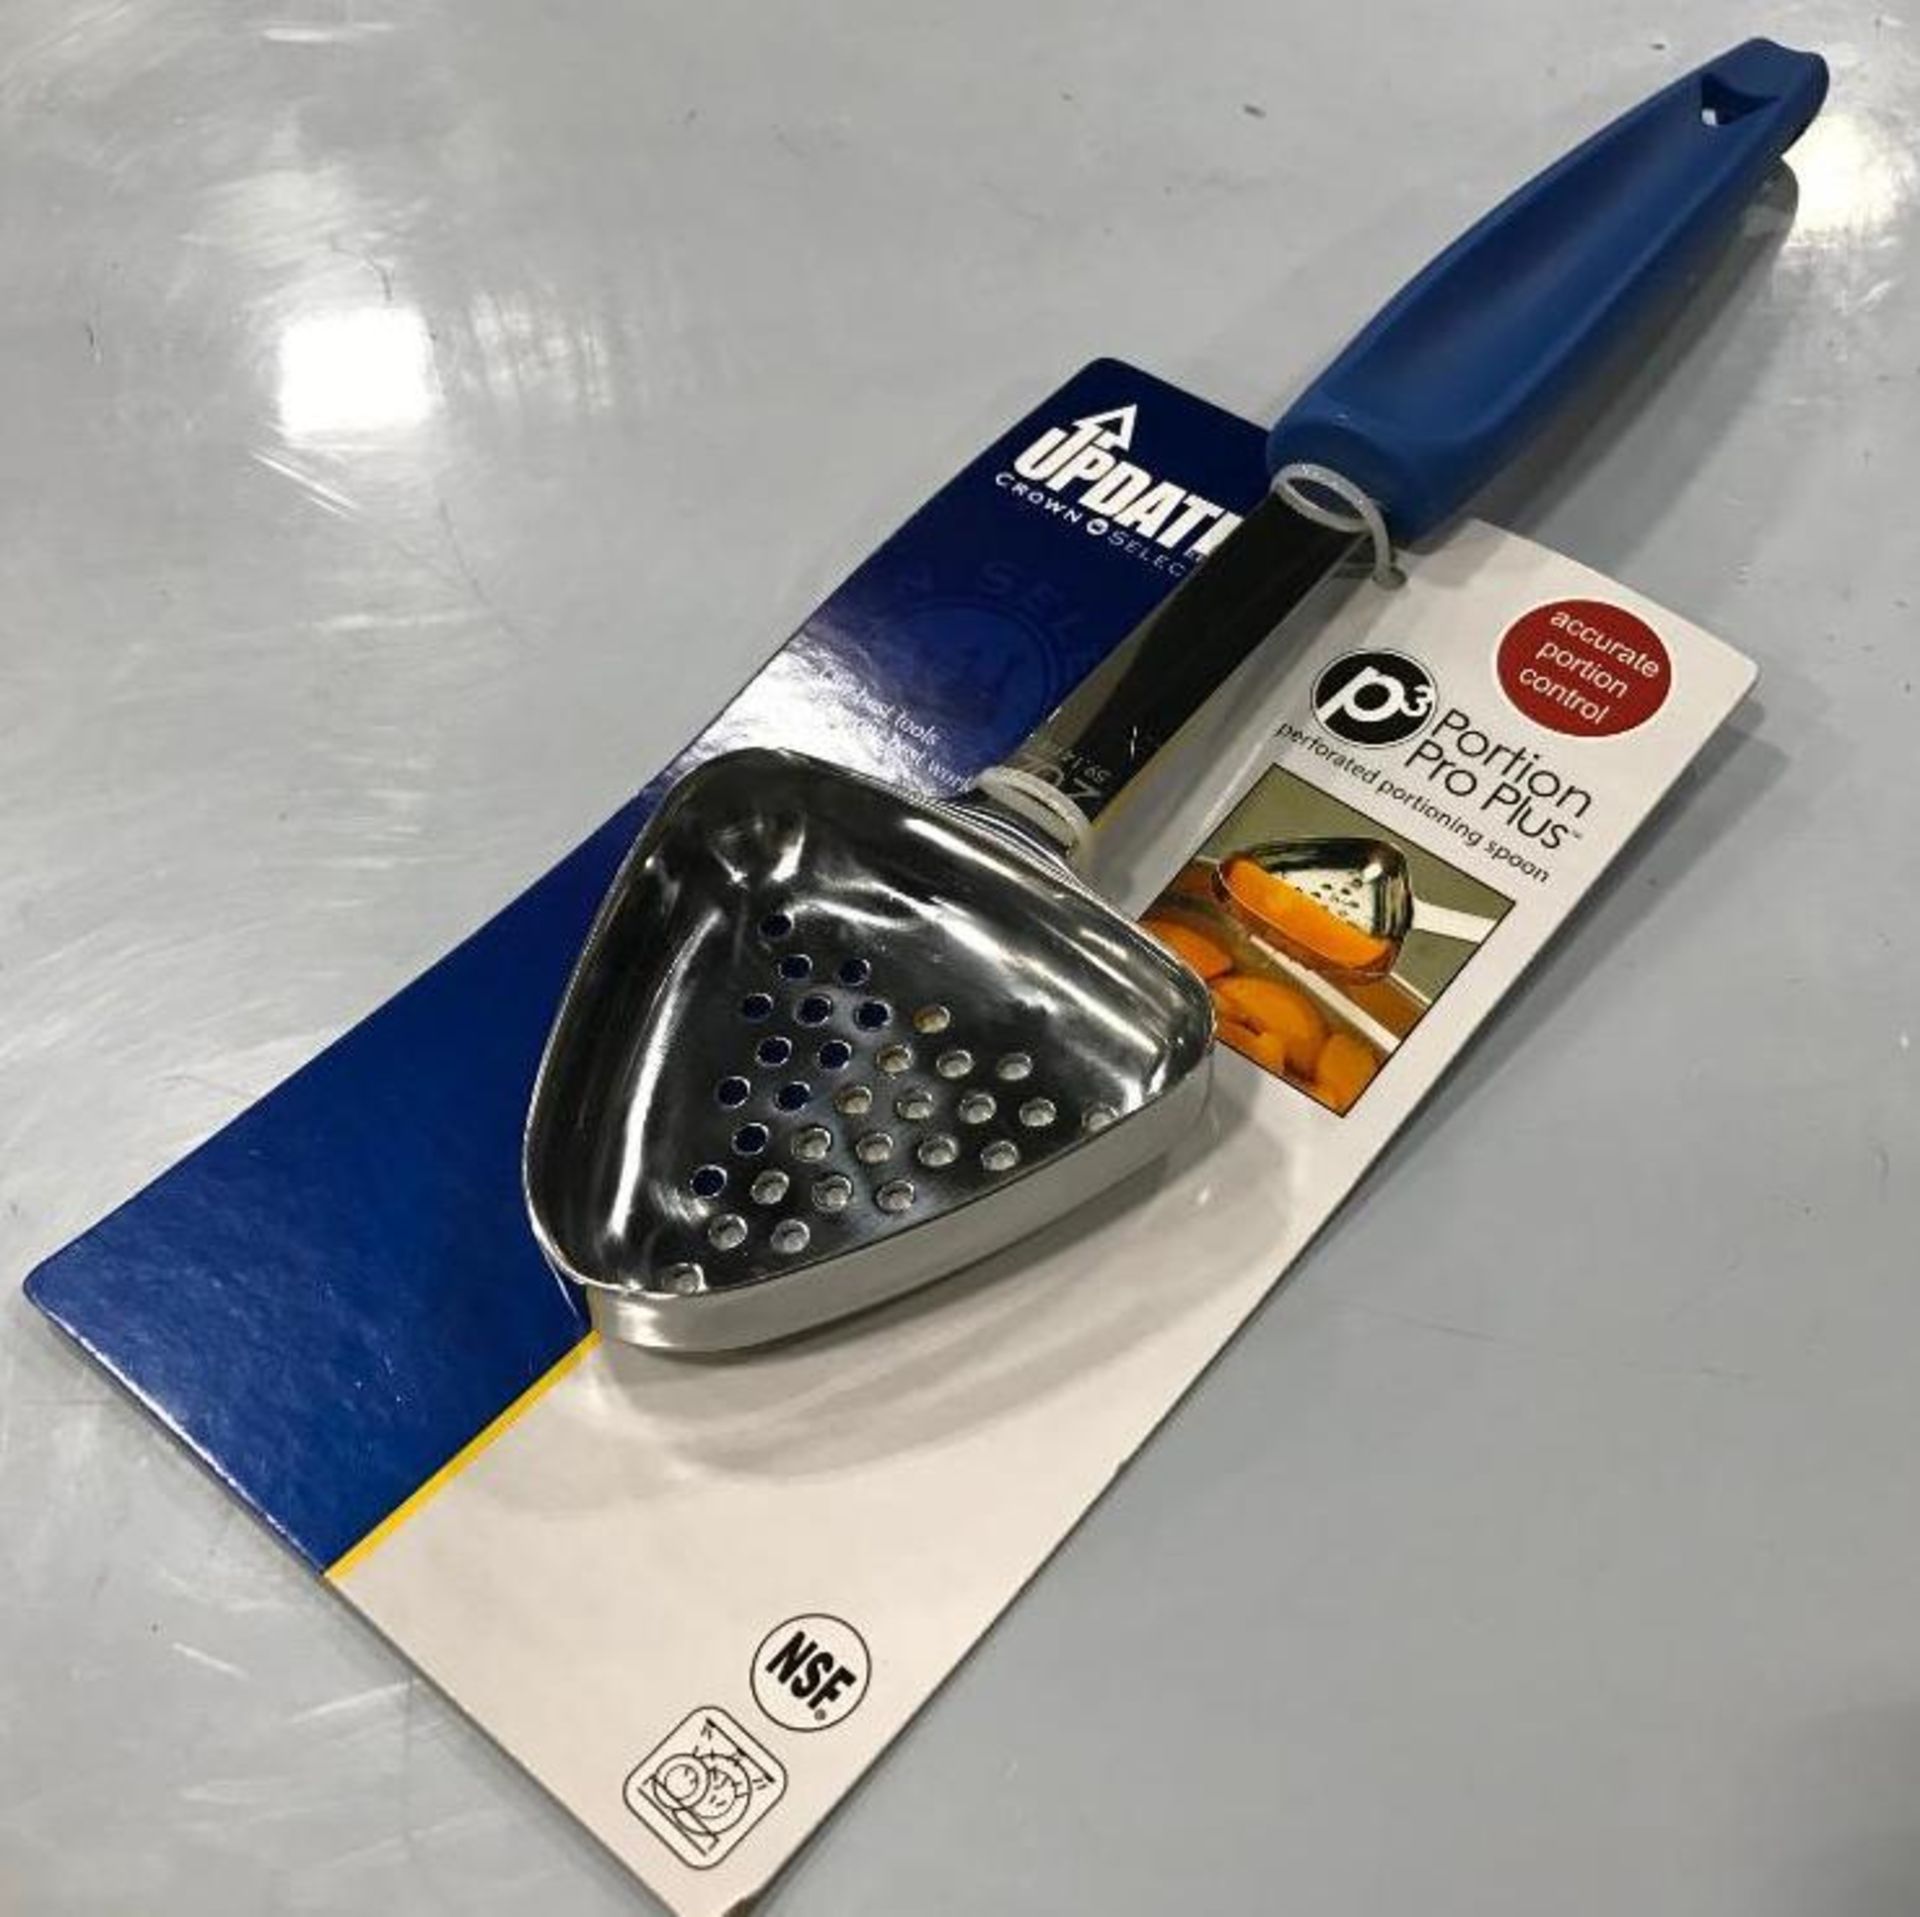 2 0Z PERFORATED PORTIONING SPOON W/ BLUE PLASTIC HANDLE - NEW